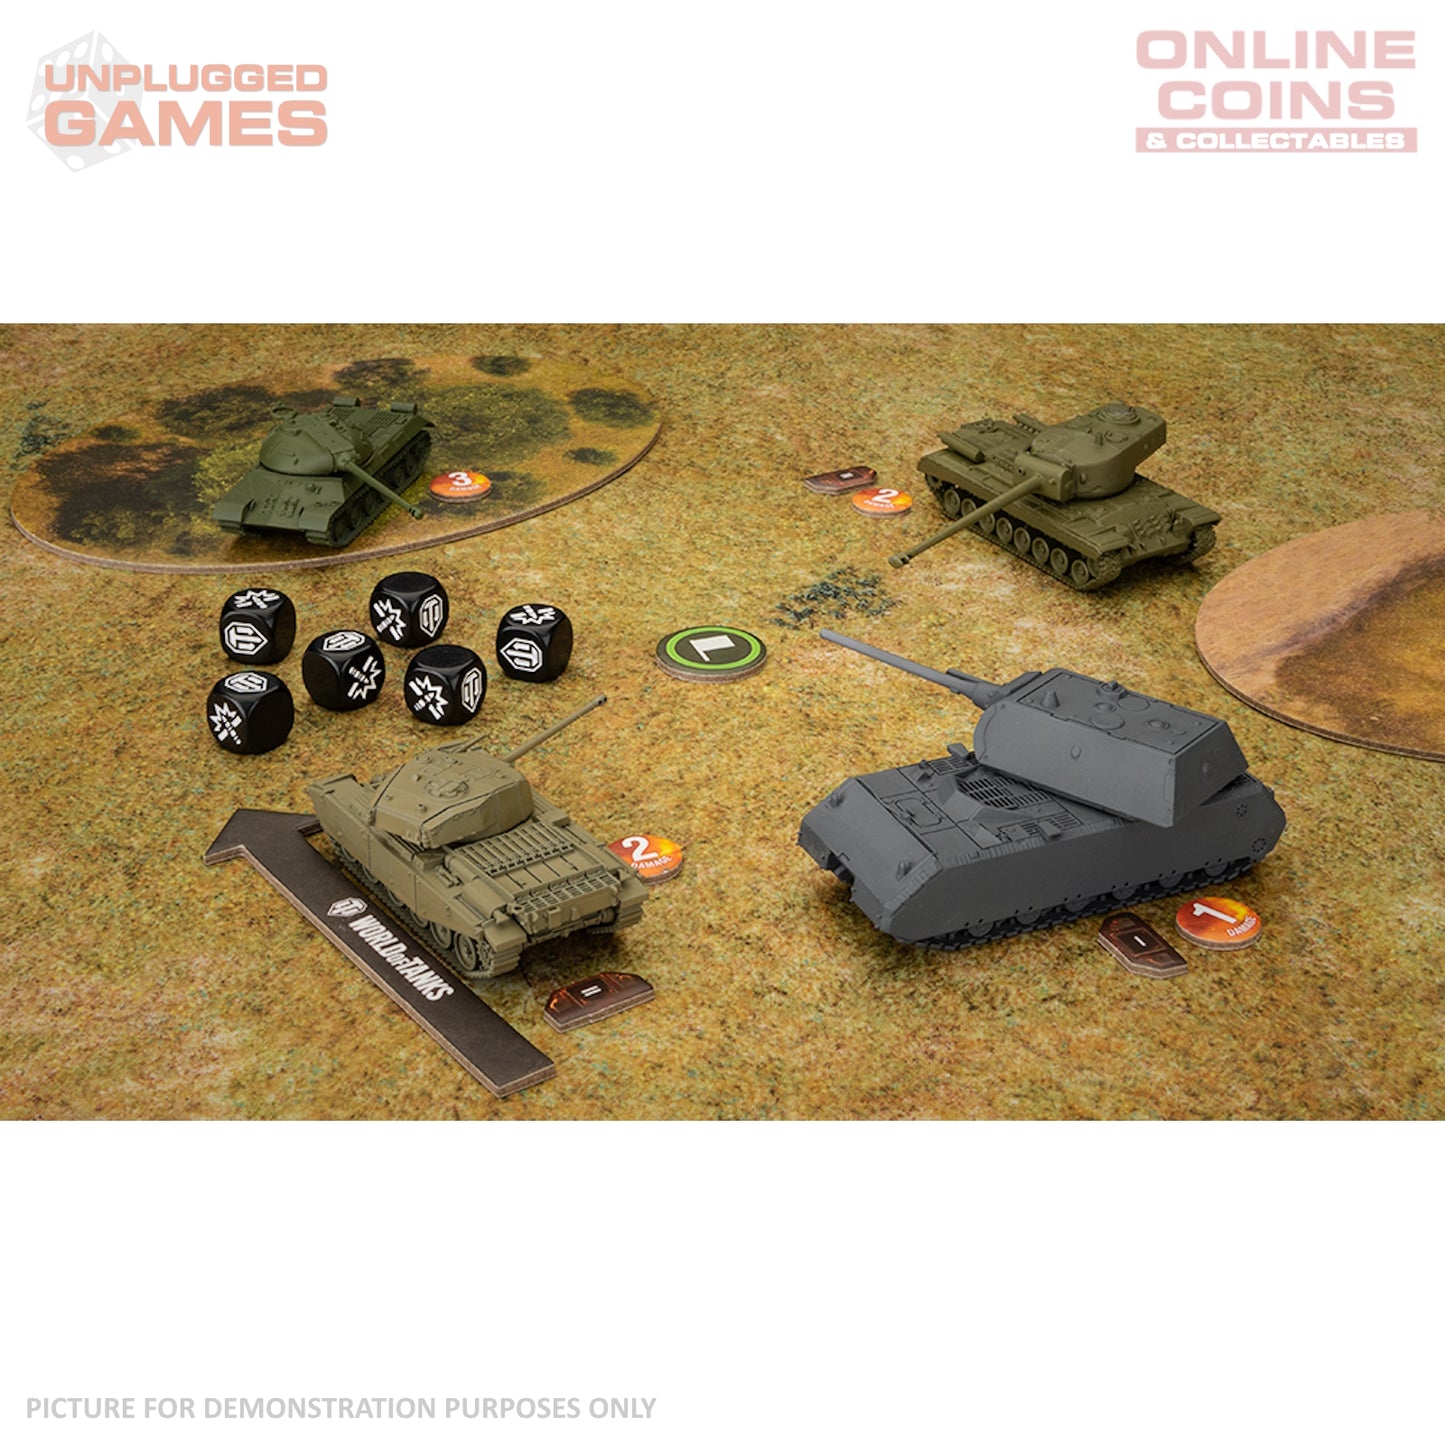 World of Tanks Miniatures Game Starter Set - New 2023 Edition